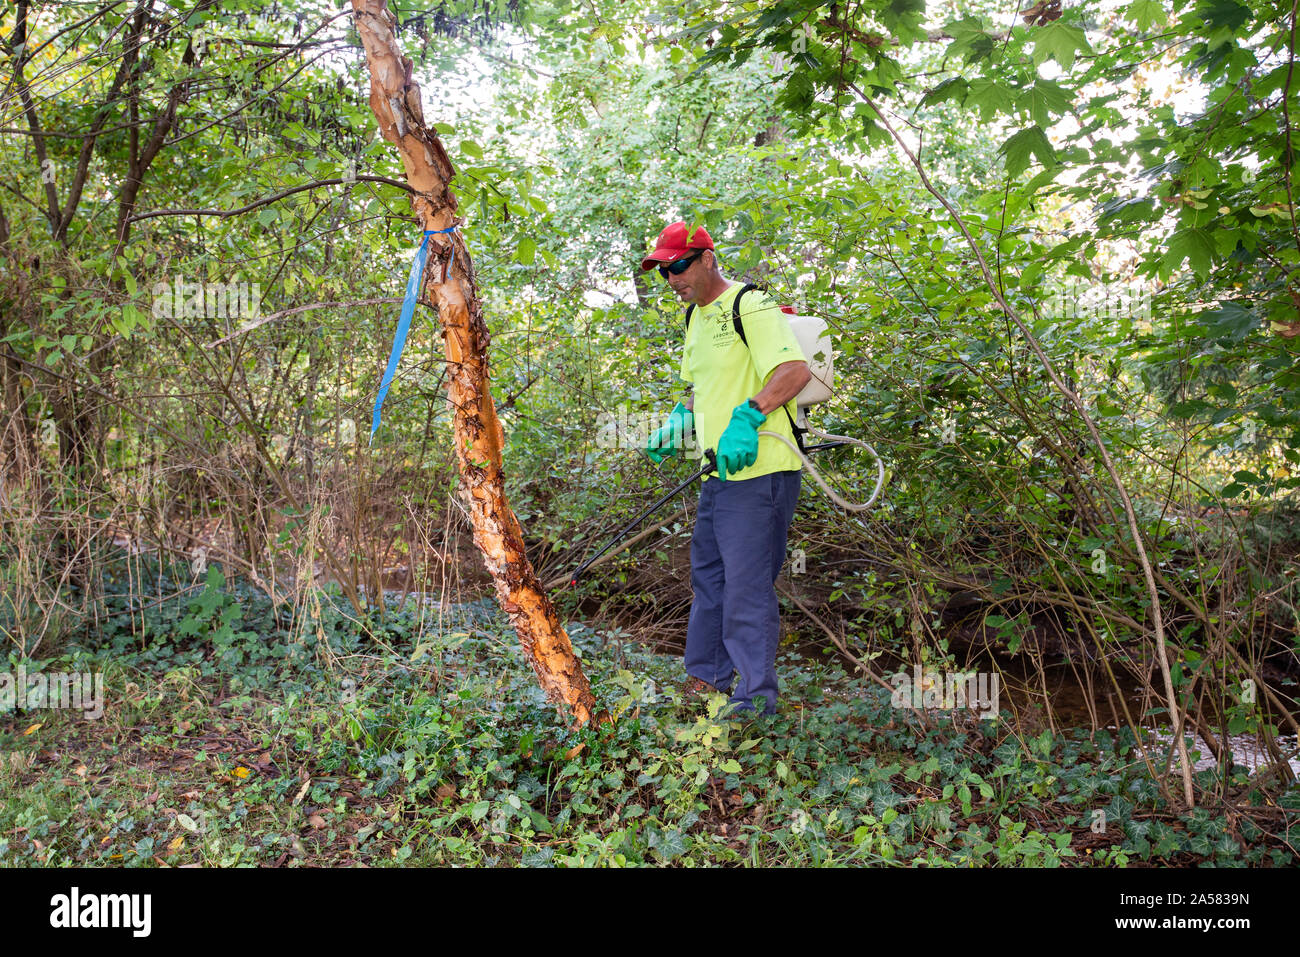 ARBORIST SPRAYING SYSTEMIC INSECTICIDE DINOTEFURAN BARK SPRAY TREATMENT TO TRUNK OF AN ORNAMENTAL RIVER BIRCH TREE TO PROTECT FROM SPOTTED LANTERNFLY Stock Photo